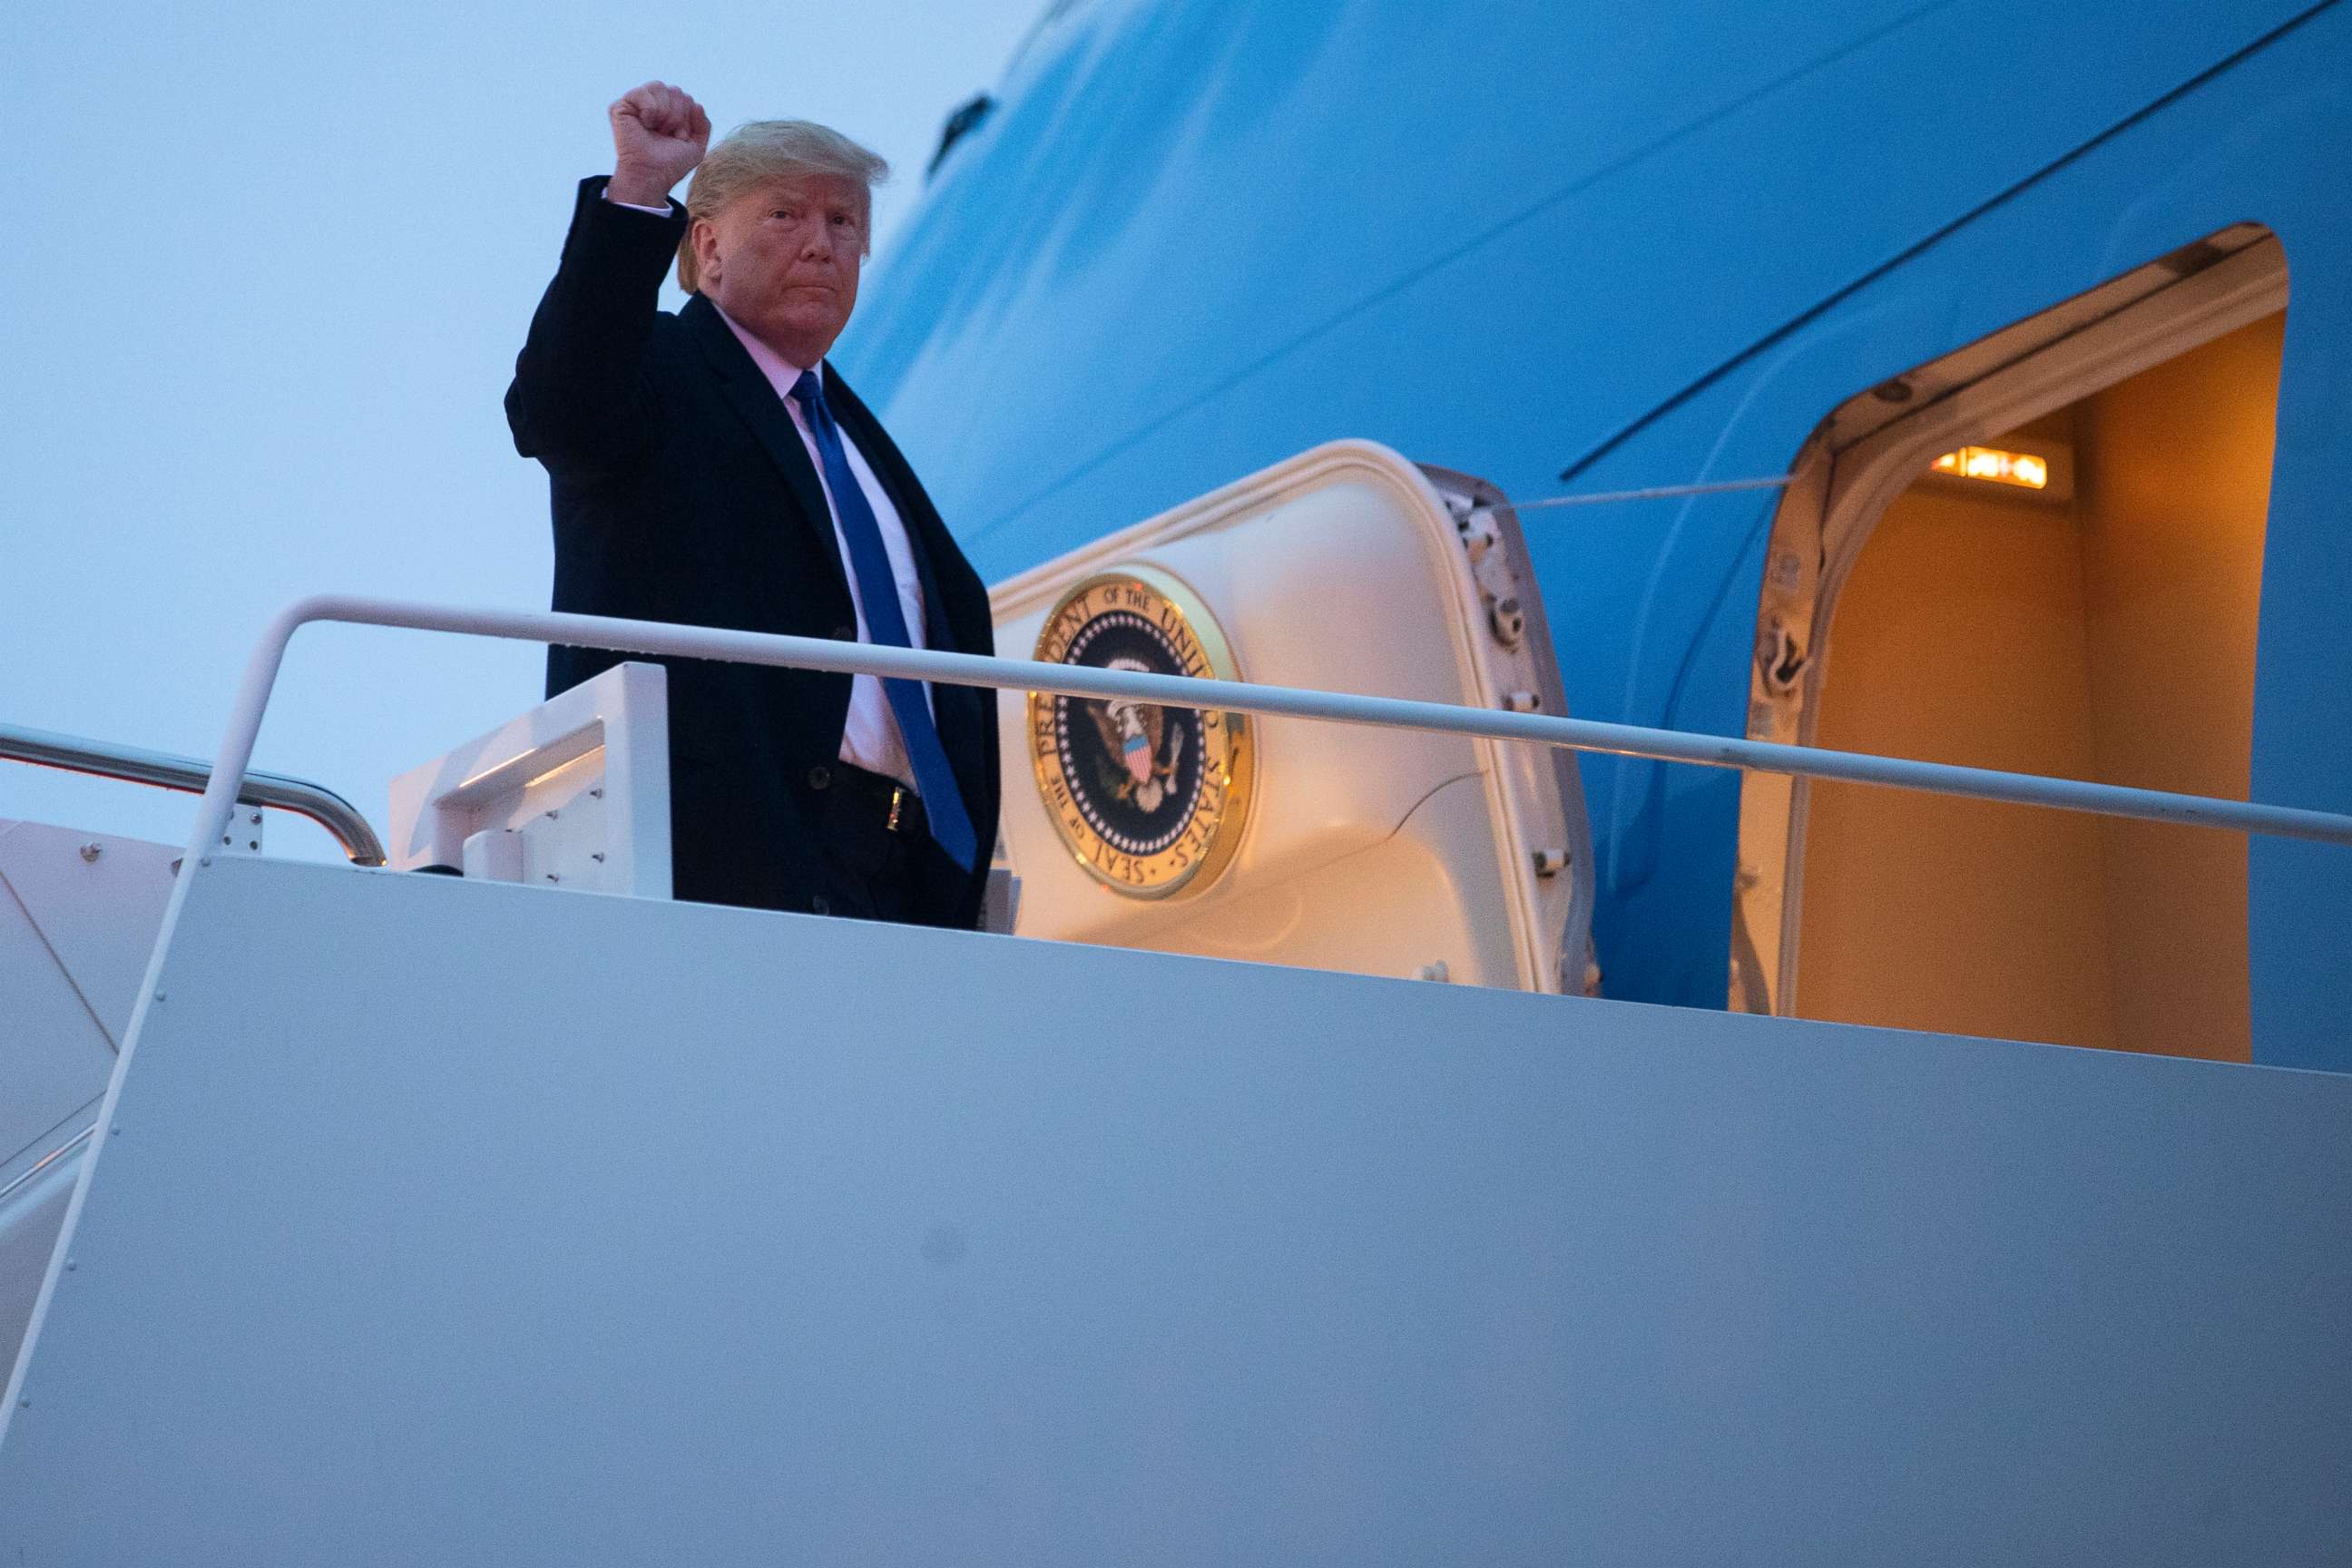 PHOTO: President Donald Trump boards Air Force One for a trip to Milwaukee to attend a campaign rally, Jan. 14, 2020, at Andrews Air Force Base, Md.